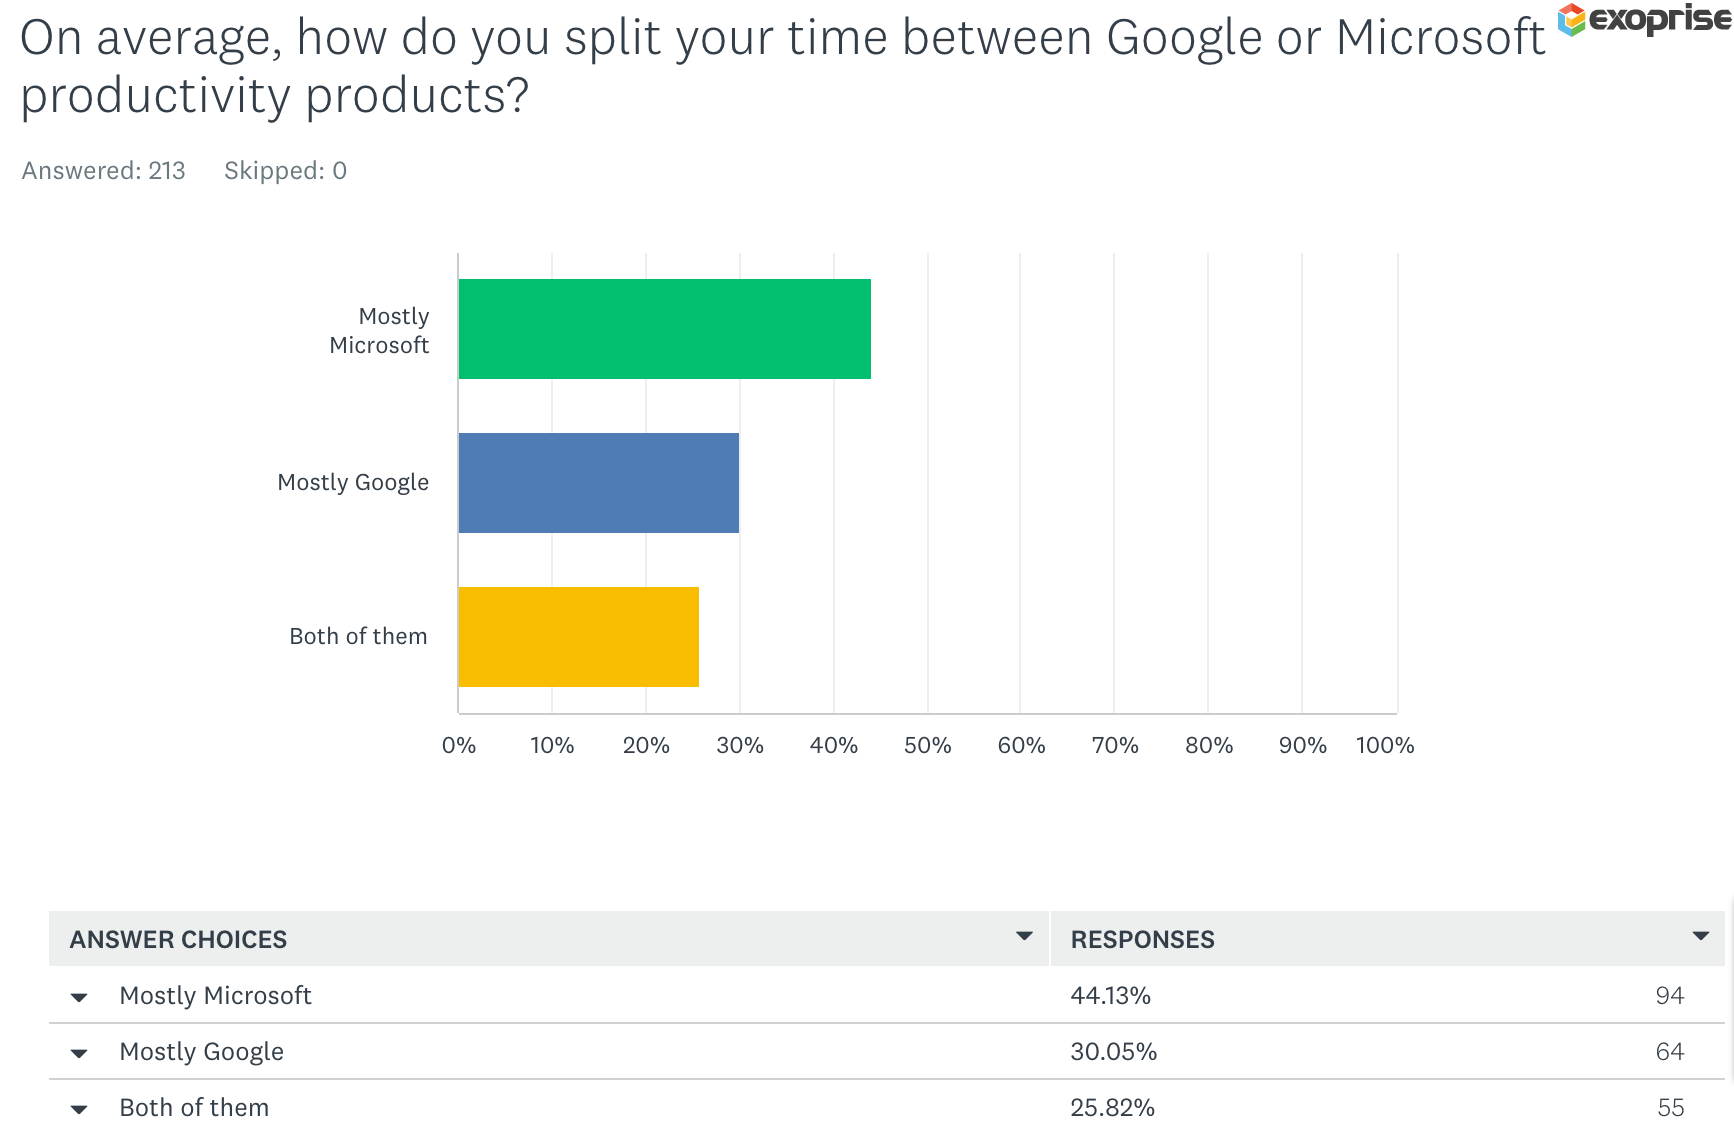 How do you split your time between Google and Microsoft platforms?